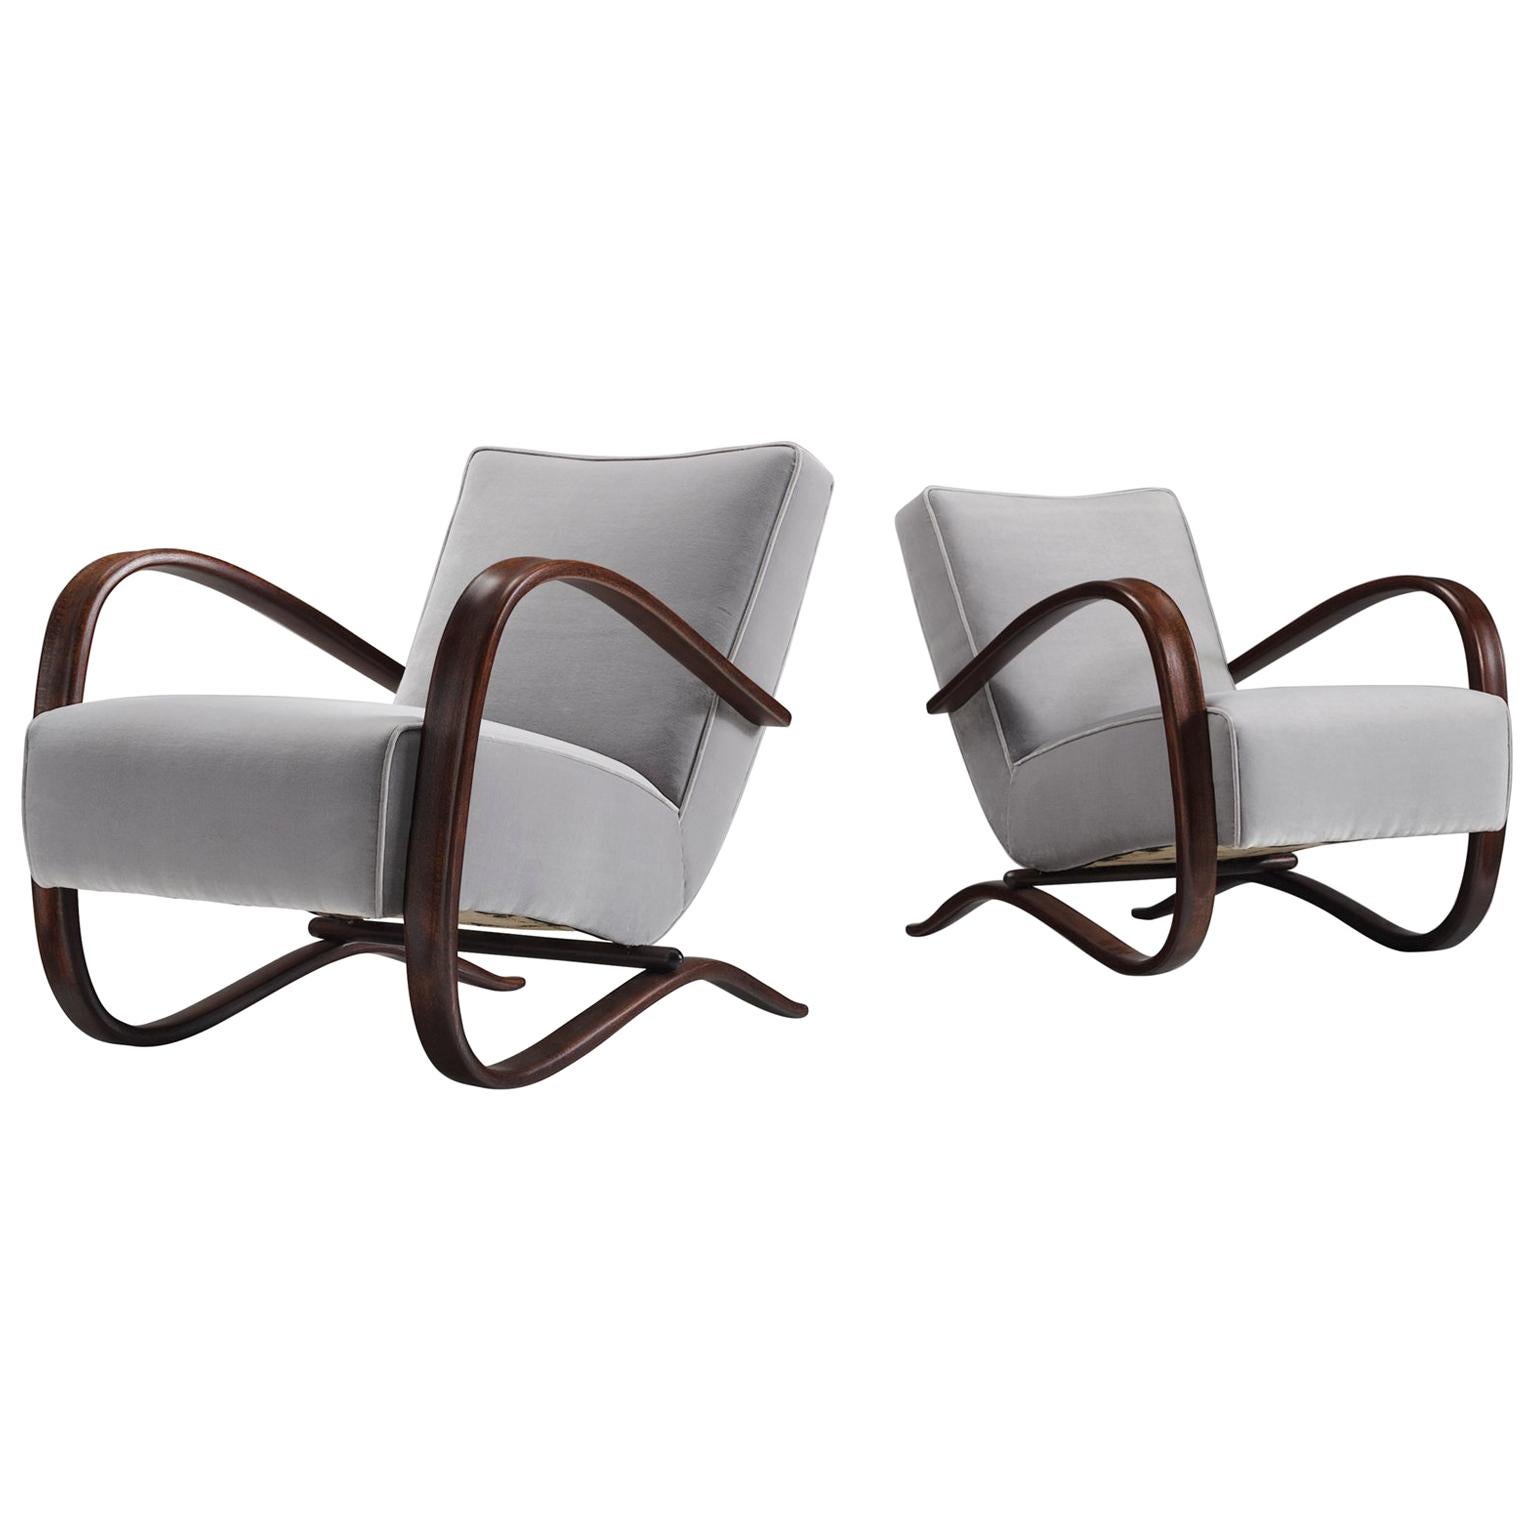 Jindrich Halabala Lounge Chairs in Reupholstered with Grey Velvet